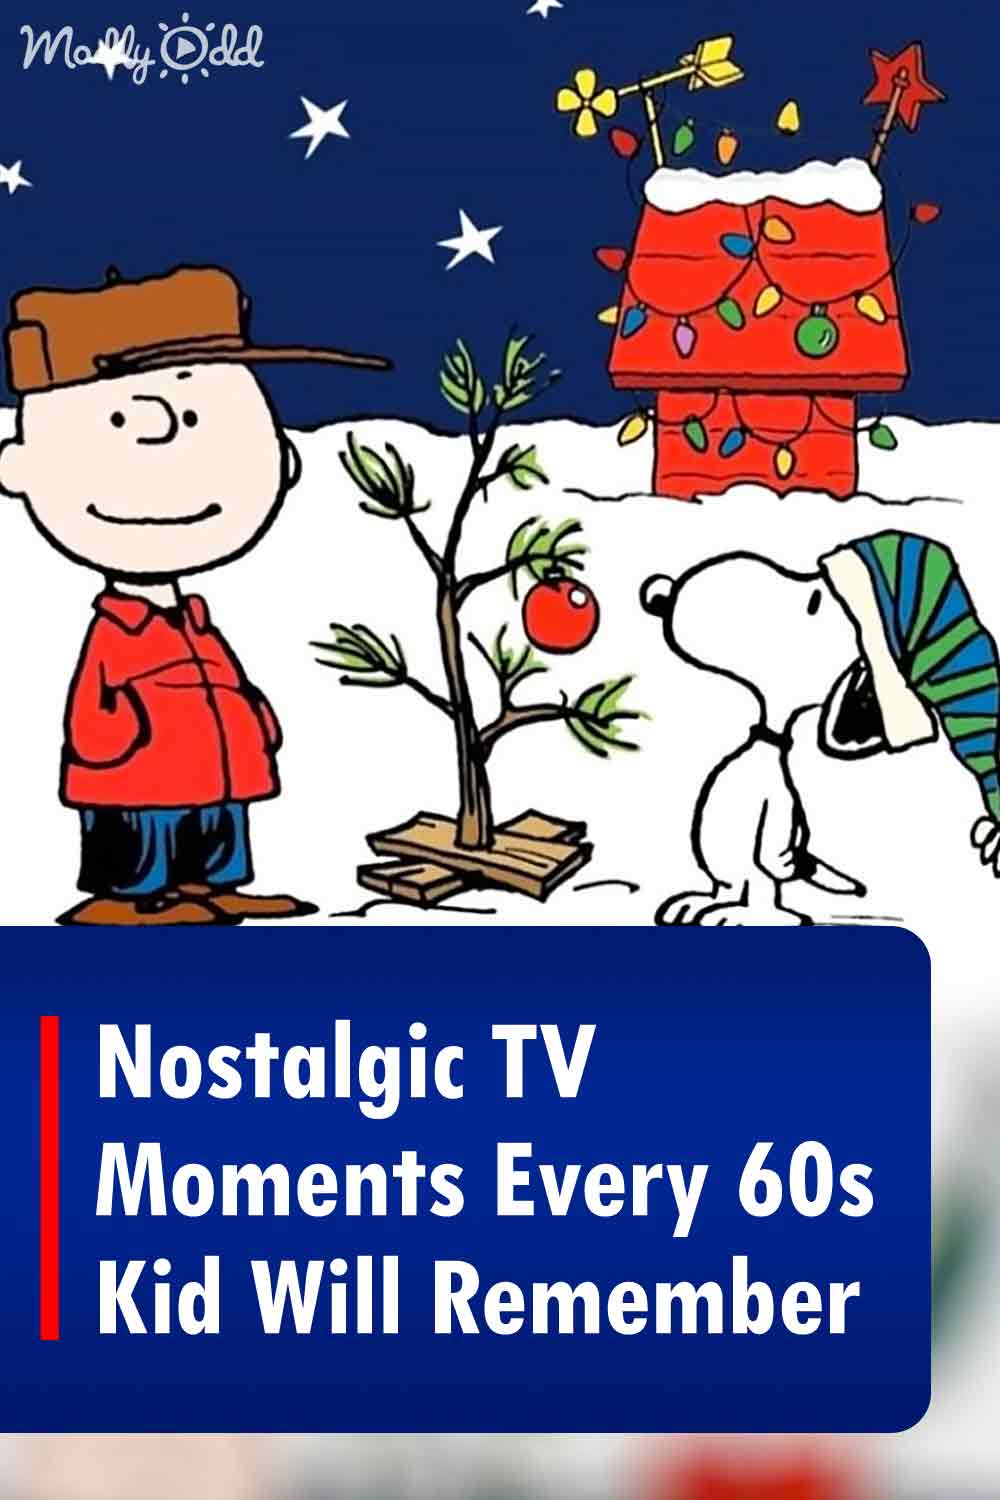 Nostalgic TV Moments Every 60s Kid Will Remember